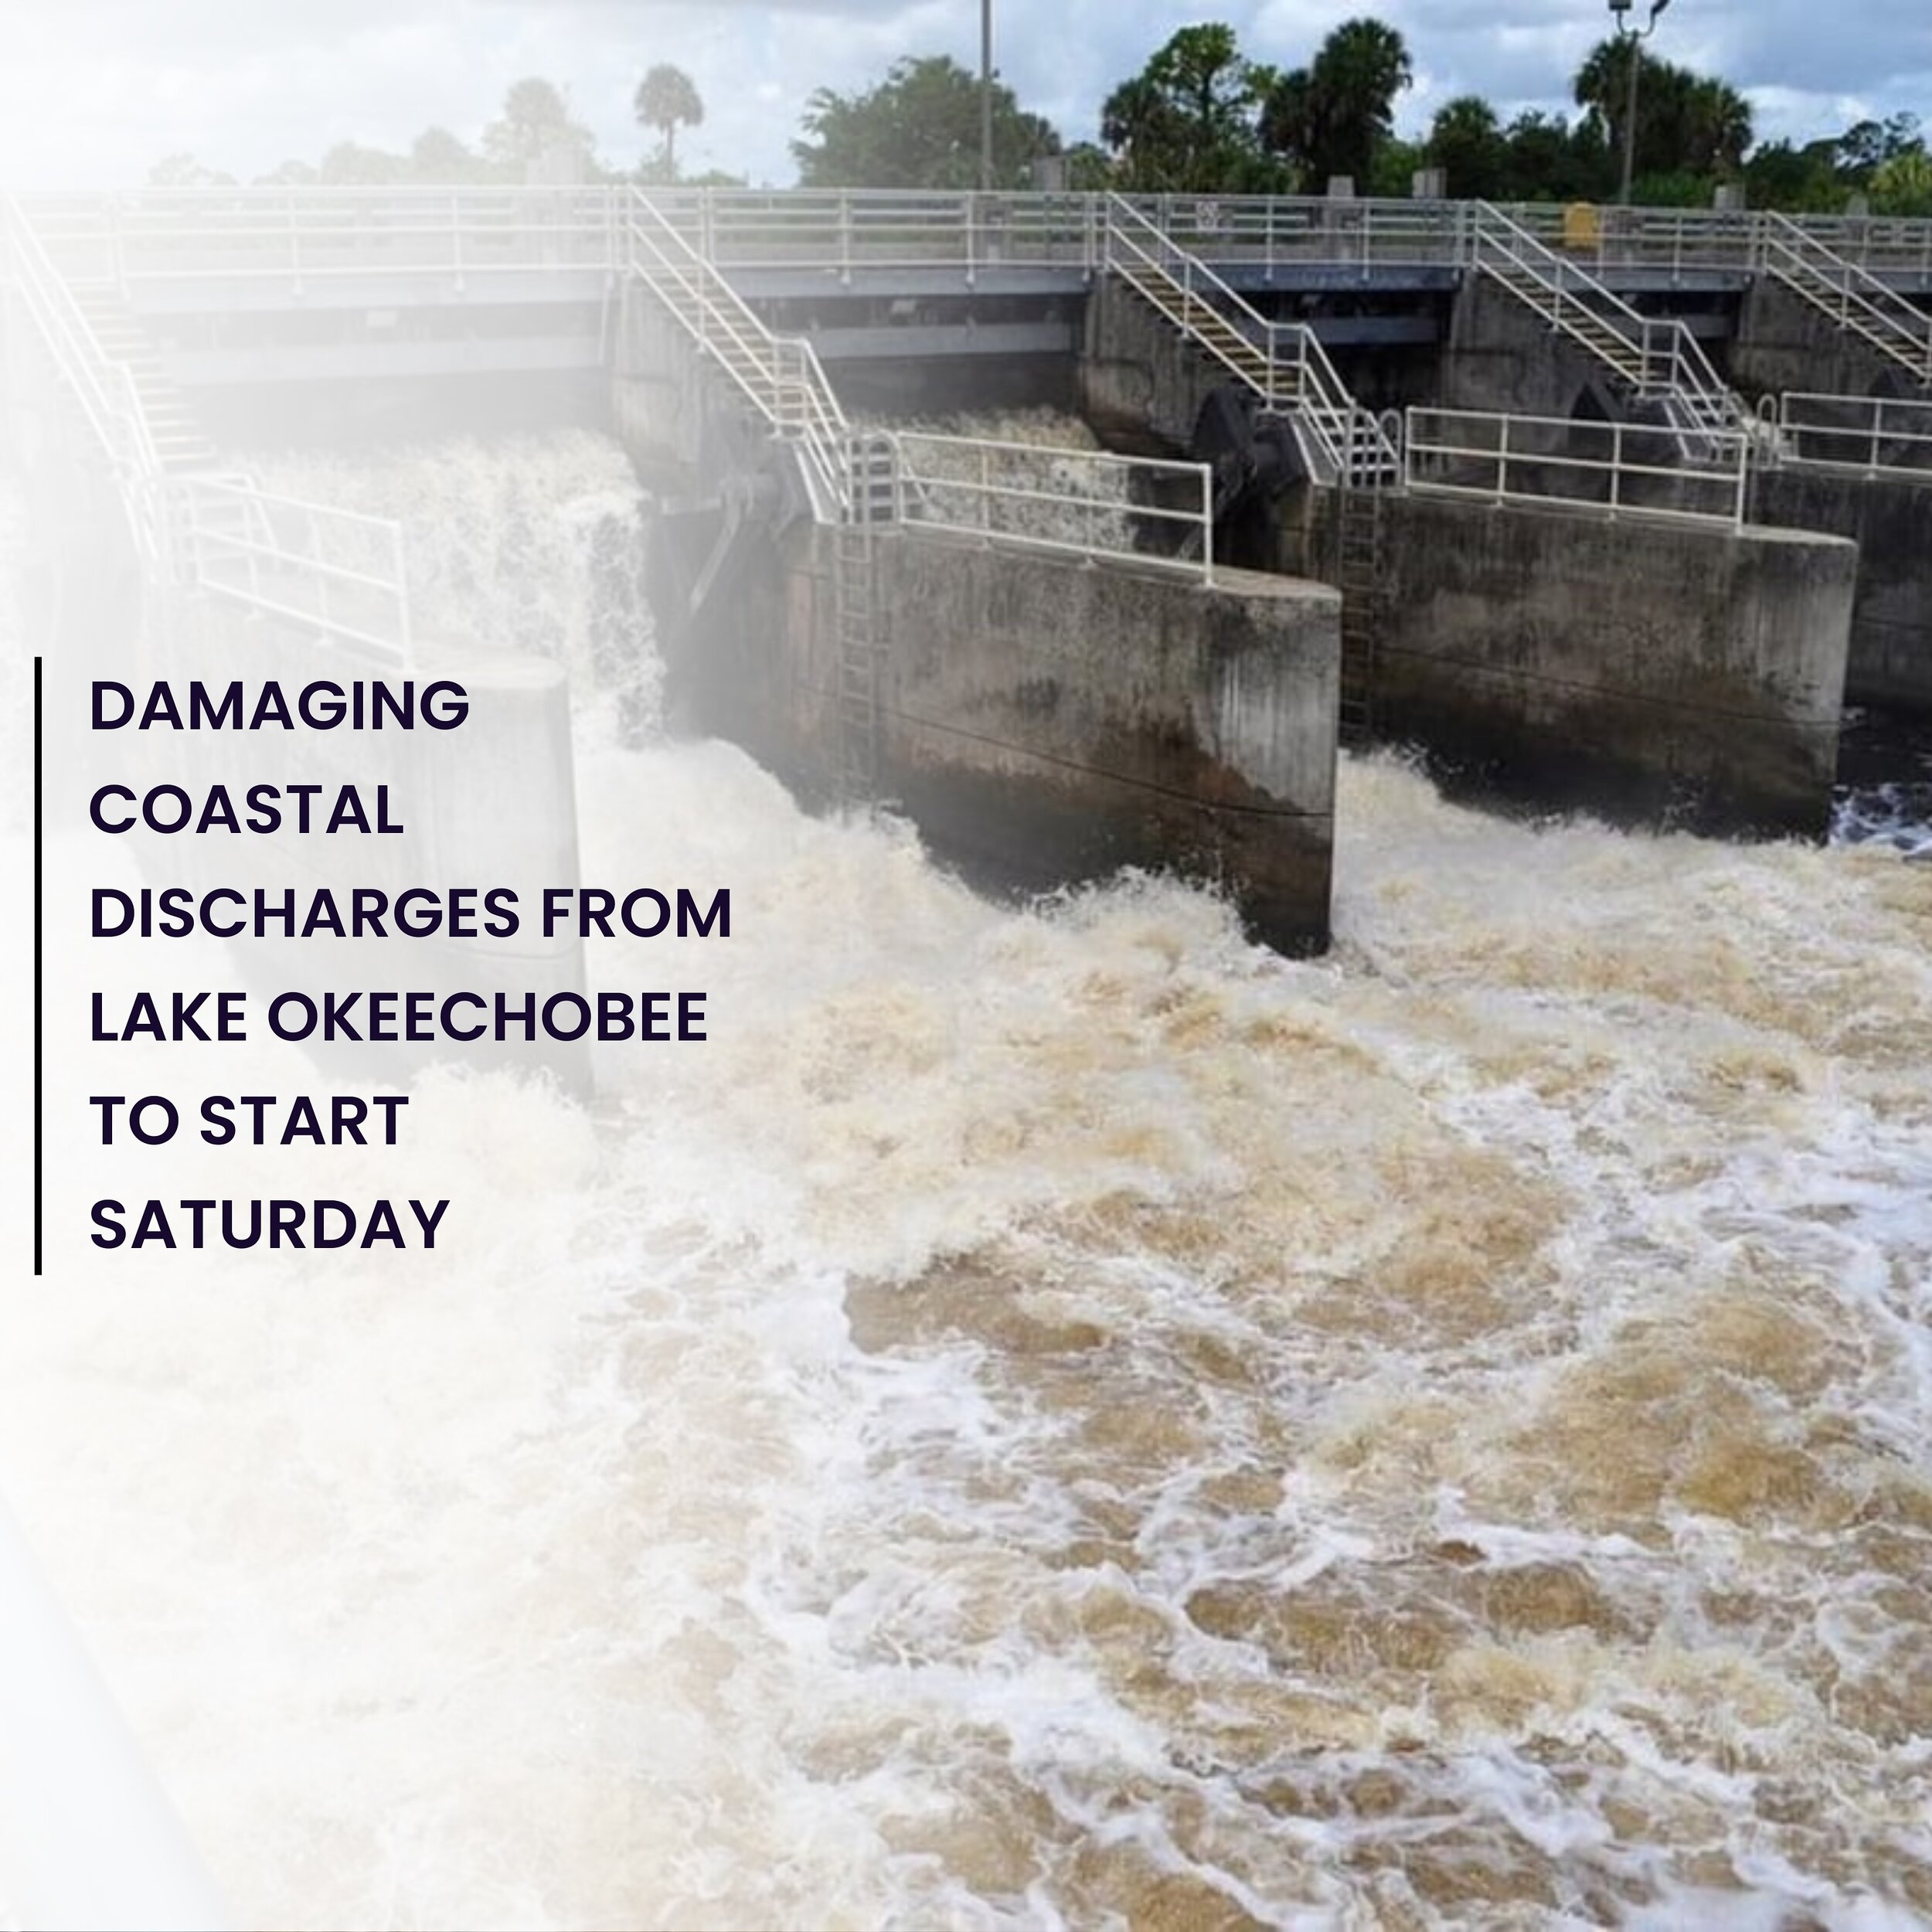 The Army Corps of Engineers announced high-volume discharges from Lake Okeechobee to both east and west coasts starting Saturday, Feb. 17th, due to the lake&rsquo;s high water level. Discharges include 4,000 cfs west to the Caloosahatchee River, 1,80